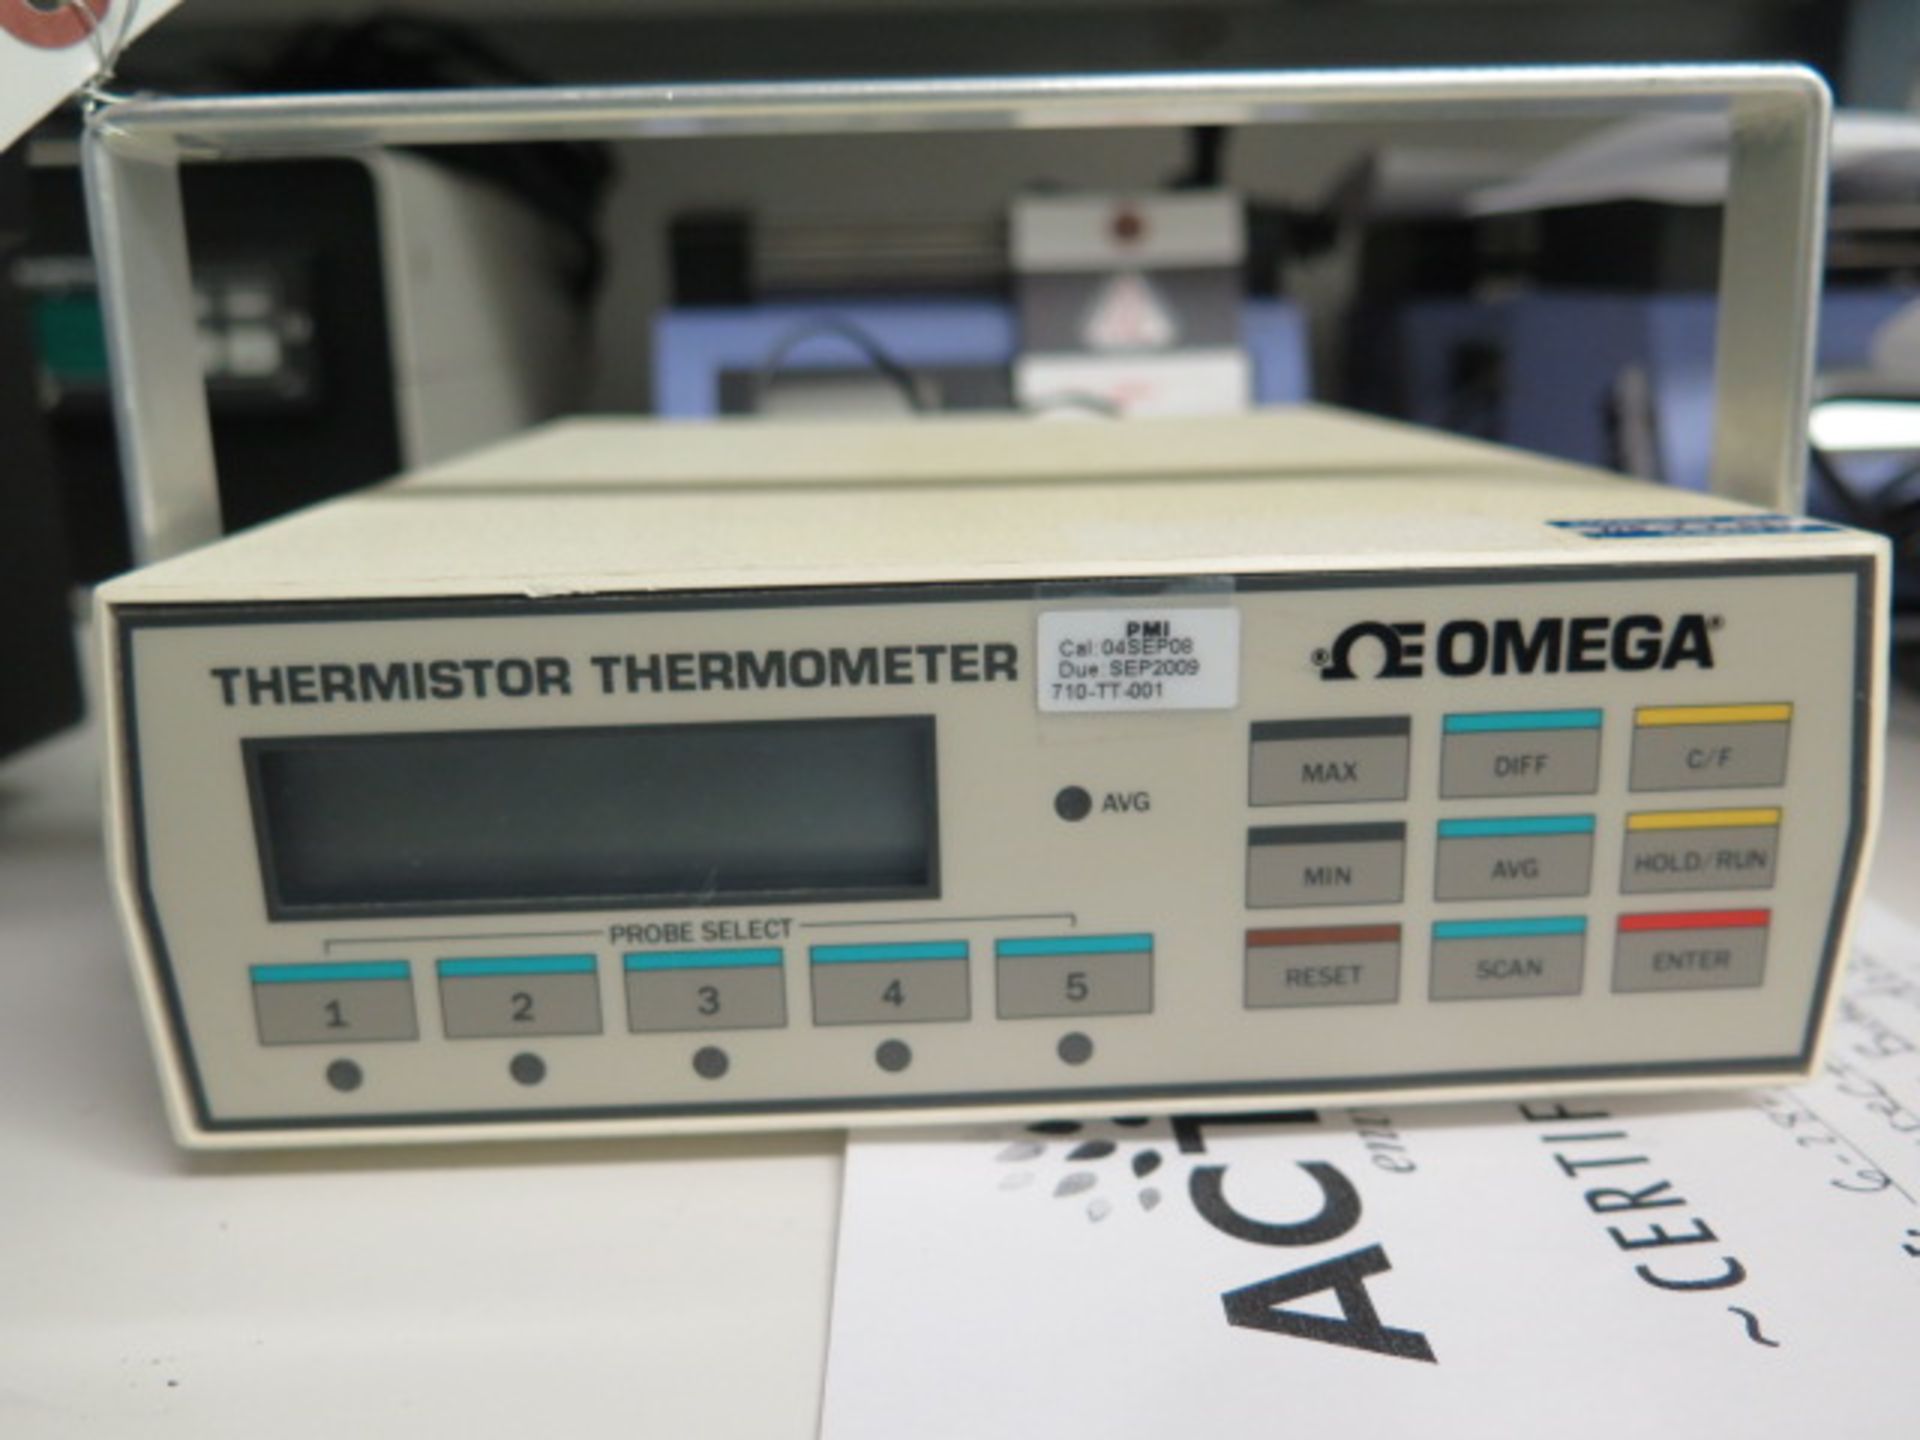 Omega "Thermistor Thermometer" Digital Thermometer (SOLD AS-IS - NO WARRANTY) - Image 4 of 4